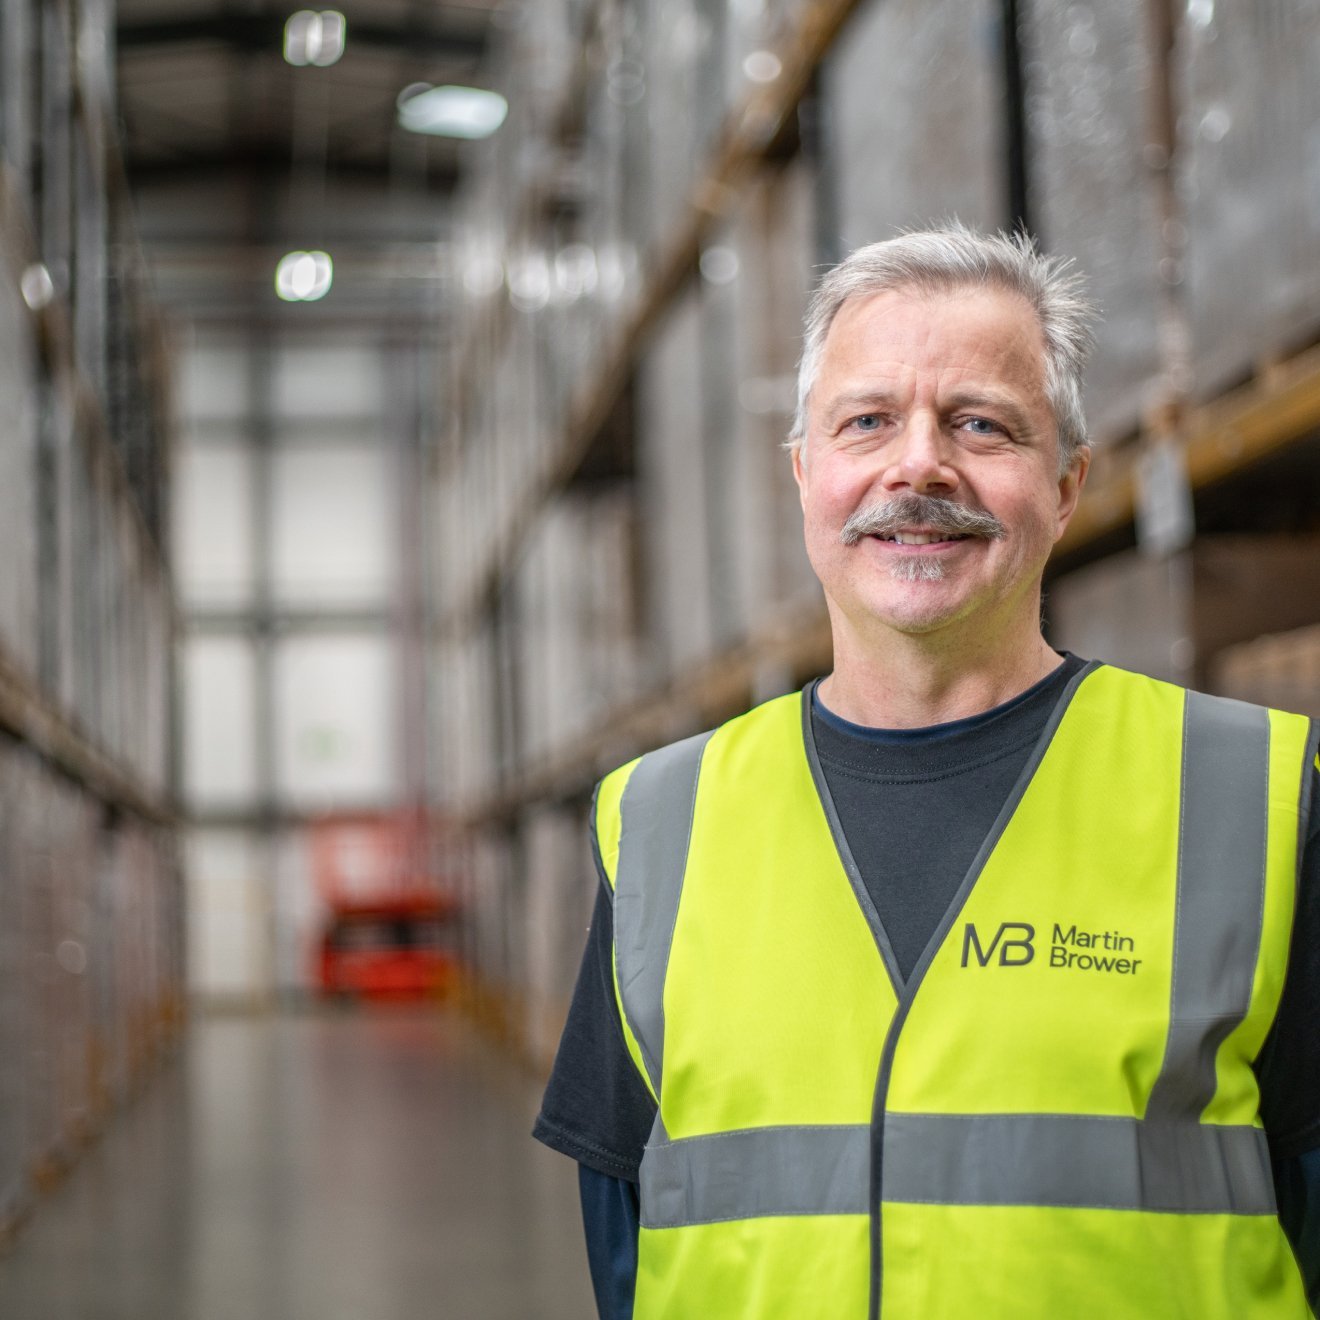 Smiling man wearing a high visibility vest in a warehouse